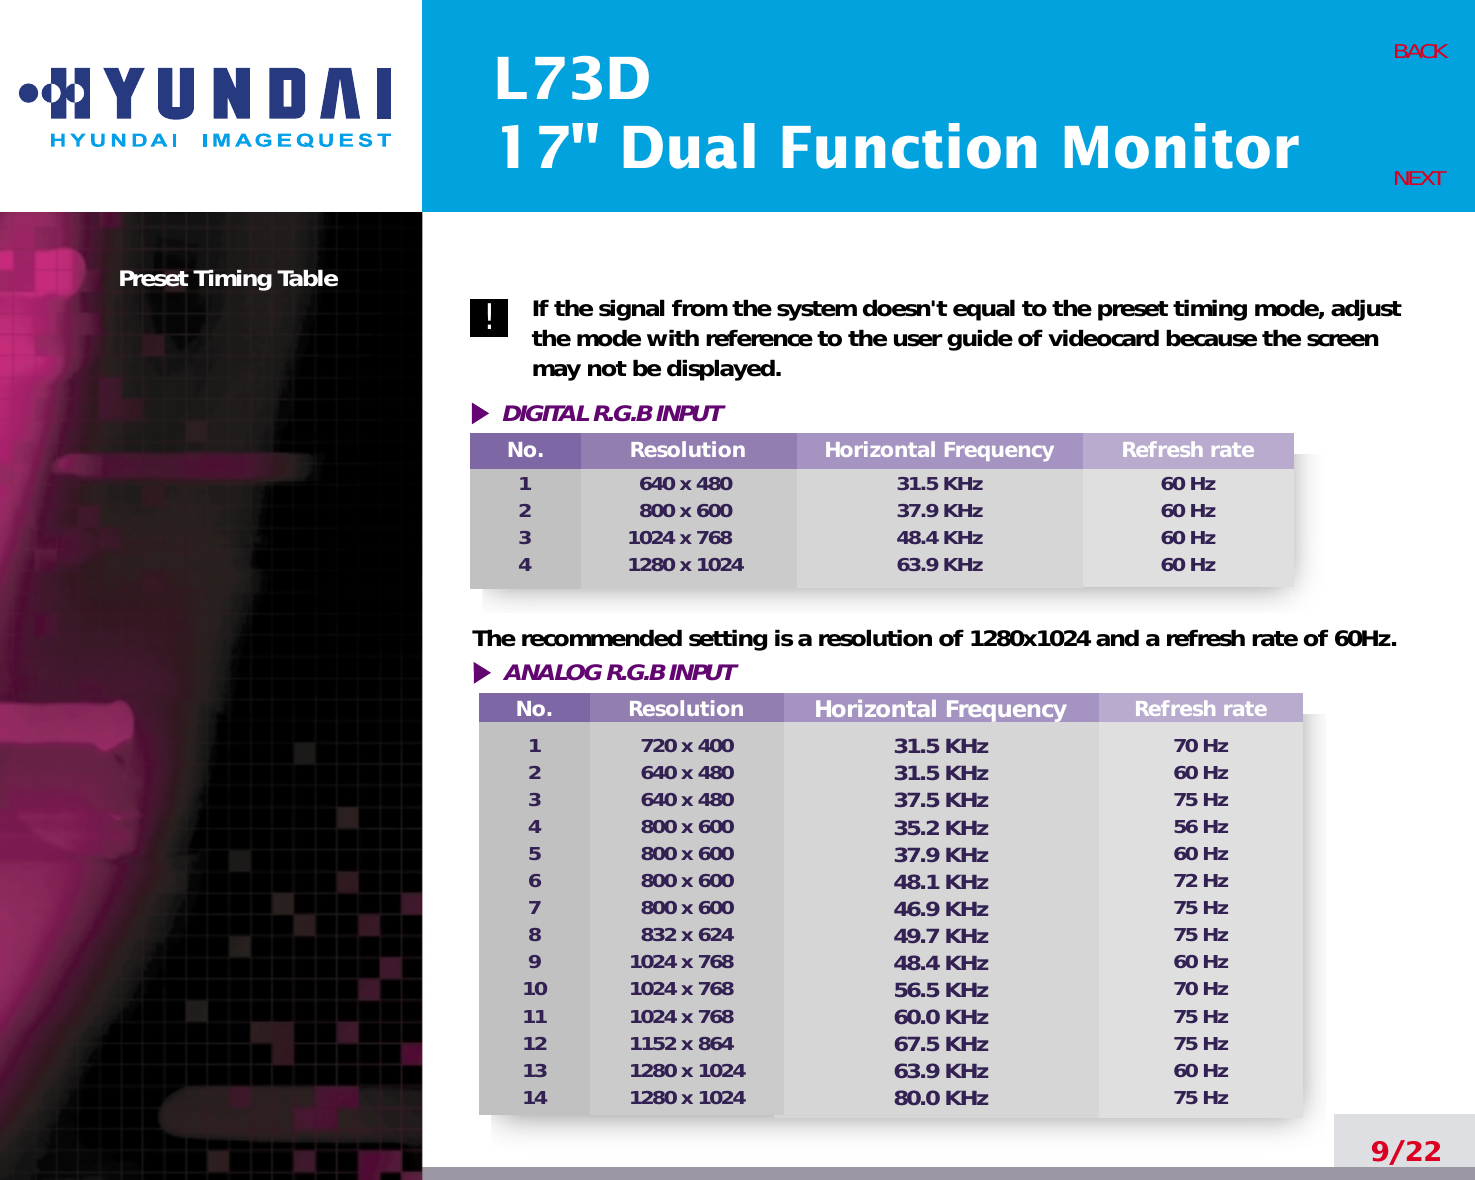 L73D17&quot; Dual Function Monitor9/22BACKNEXTPreset Timing Table If the signal from the system doesn&apos;t equal to the preset timing mode, adjustthe mode with reference to the user guide of videocard because the screenmay not be displayed.The recommended setting is a resolution of 1280x1024 and a refresh rate of 60Hz.DIGITAL R.G.B INPUTNo.1234Resolution640 x 480800 x 6001024 x 7681280 x 1024Horizontal Frequency31.5 KHz37.9 KHz48.4 KHz63.9 KHzRefresh rate60 Hz60 Hz60 Hz60 Hz!No.1234567891011121314Resolution720 x 400640 x 480640 x 480 800 x 600800 x 600800 x 600800 x 600832 x 6241024 x 7681024 x 7681024 x 7681152 x 8641280 x 10241280 x 1024Horizontal Frequency31.5 KHz31.5 KHz37.5 KHz35.2 KHz37.9 KHz48.1 KHz46.9 KHz49.7 KHz48.4 KHz56.5 KHz60.0 KHz67.5 KHz63.9 KHz80.0 KHzRefresh rate70 Hz60 Hz75 Hz56 Hz60 Hz72 Hz75 Hz75 Hz60 Hz70 Hz75 Hz75 Hz60 Hz75 HzANALOG R.G.B INPUT 